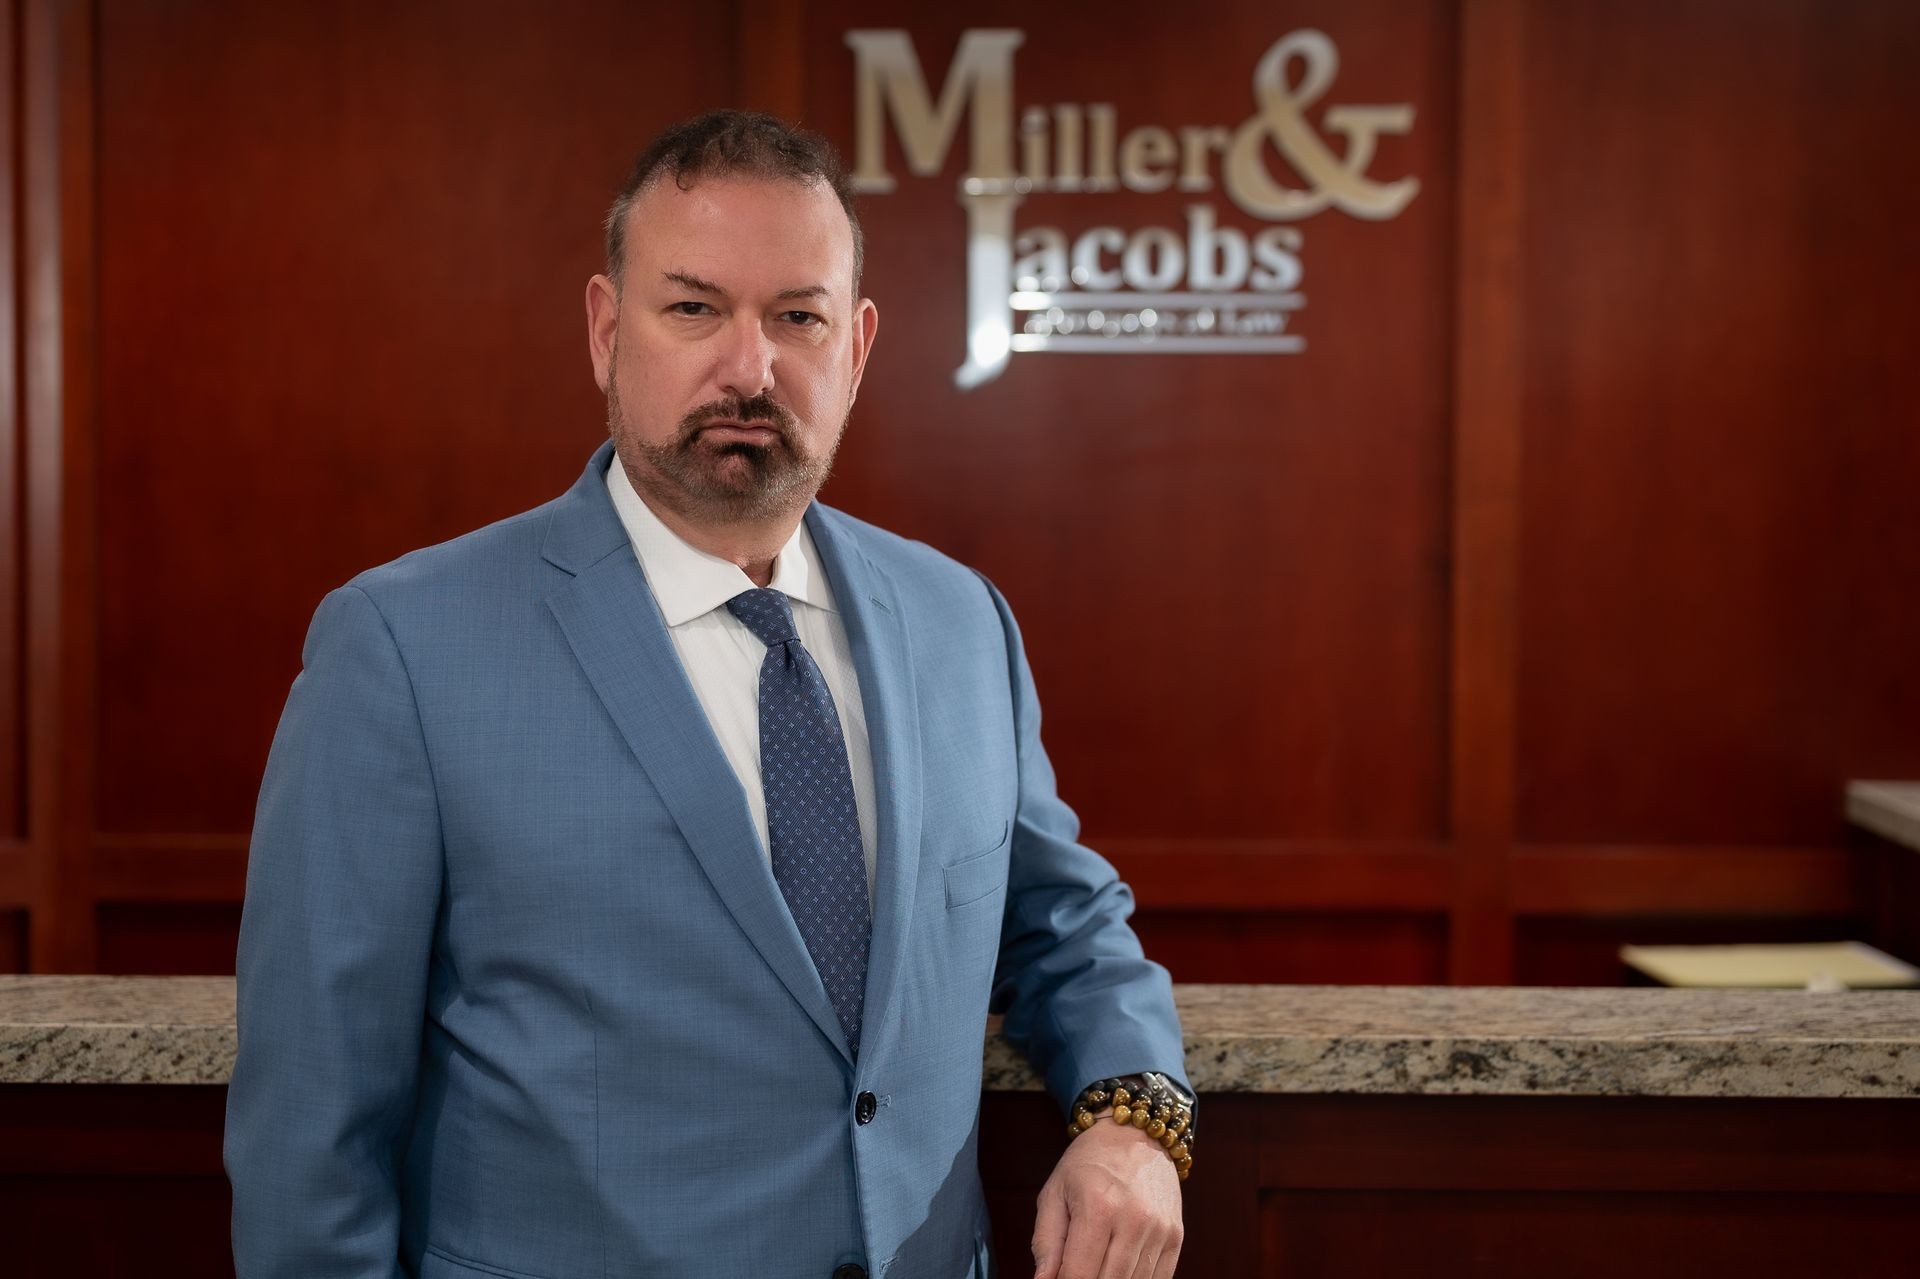 Attorney Rick S. Jacobs, Esquire in blue suit and blue tie